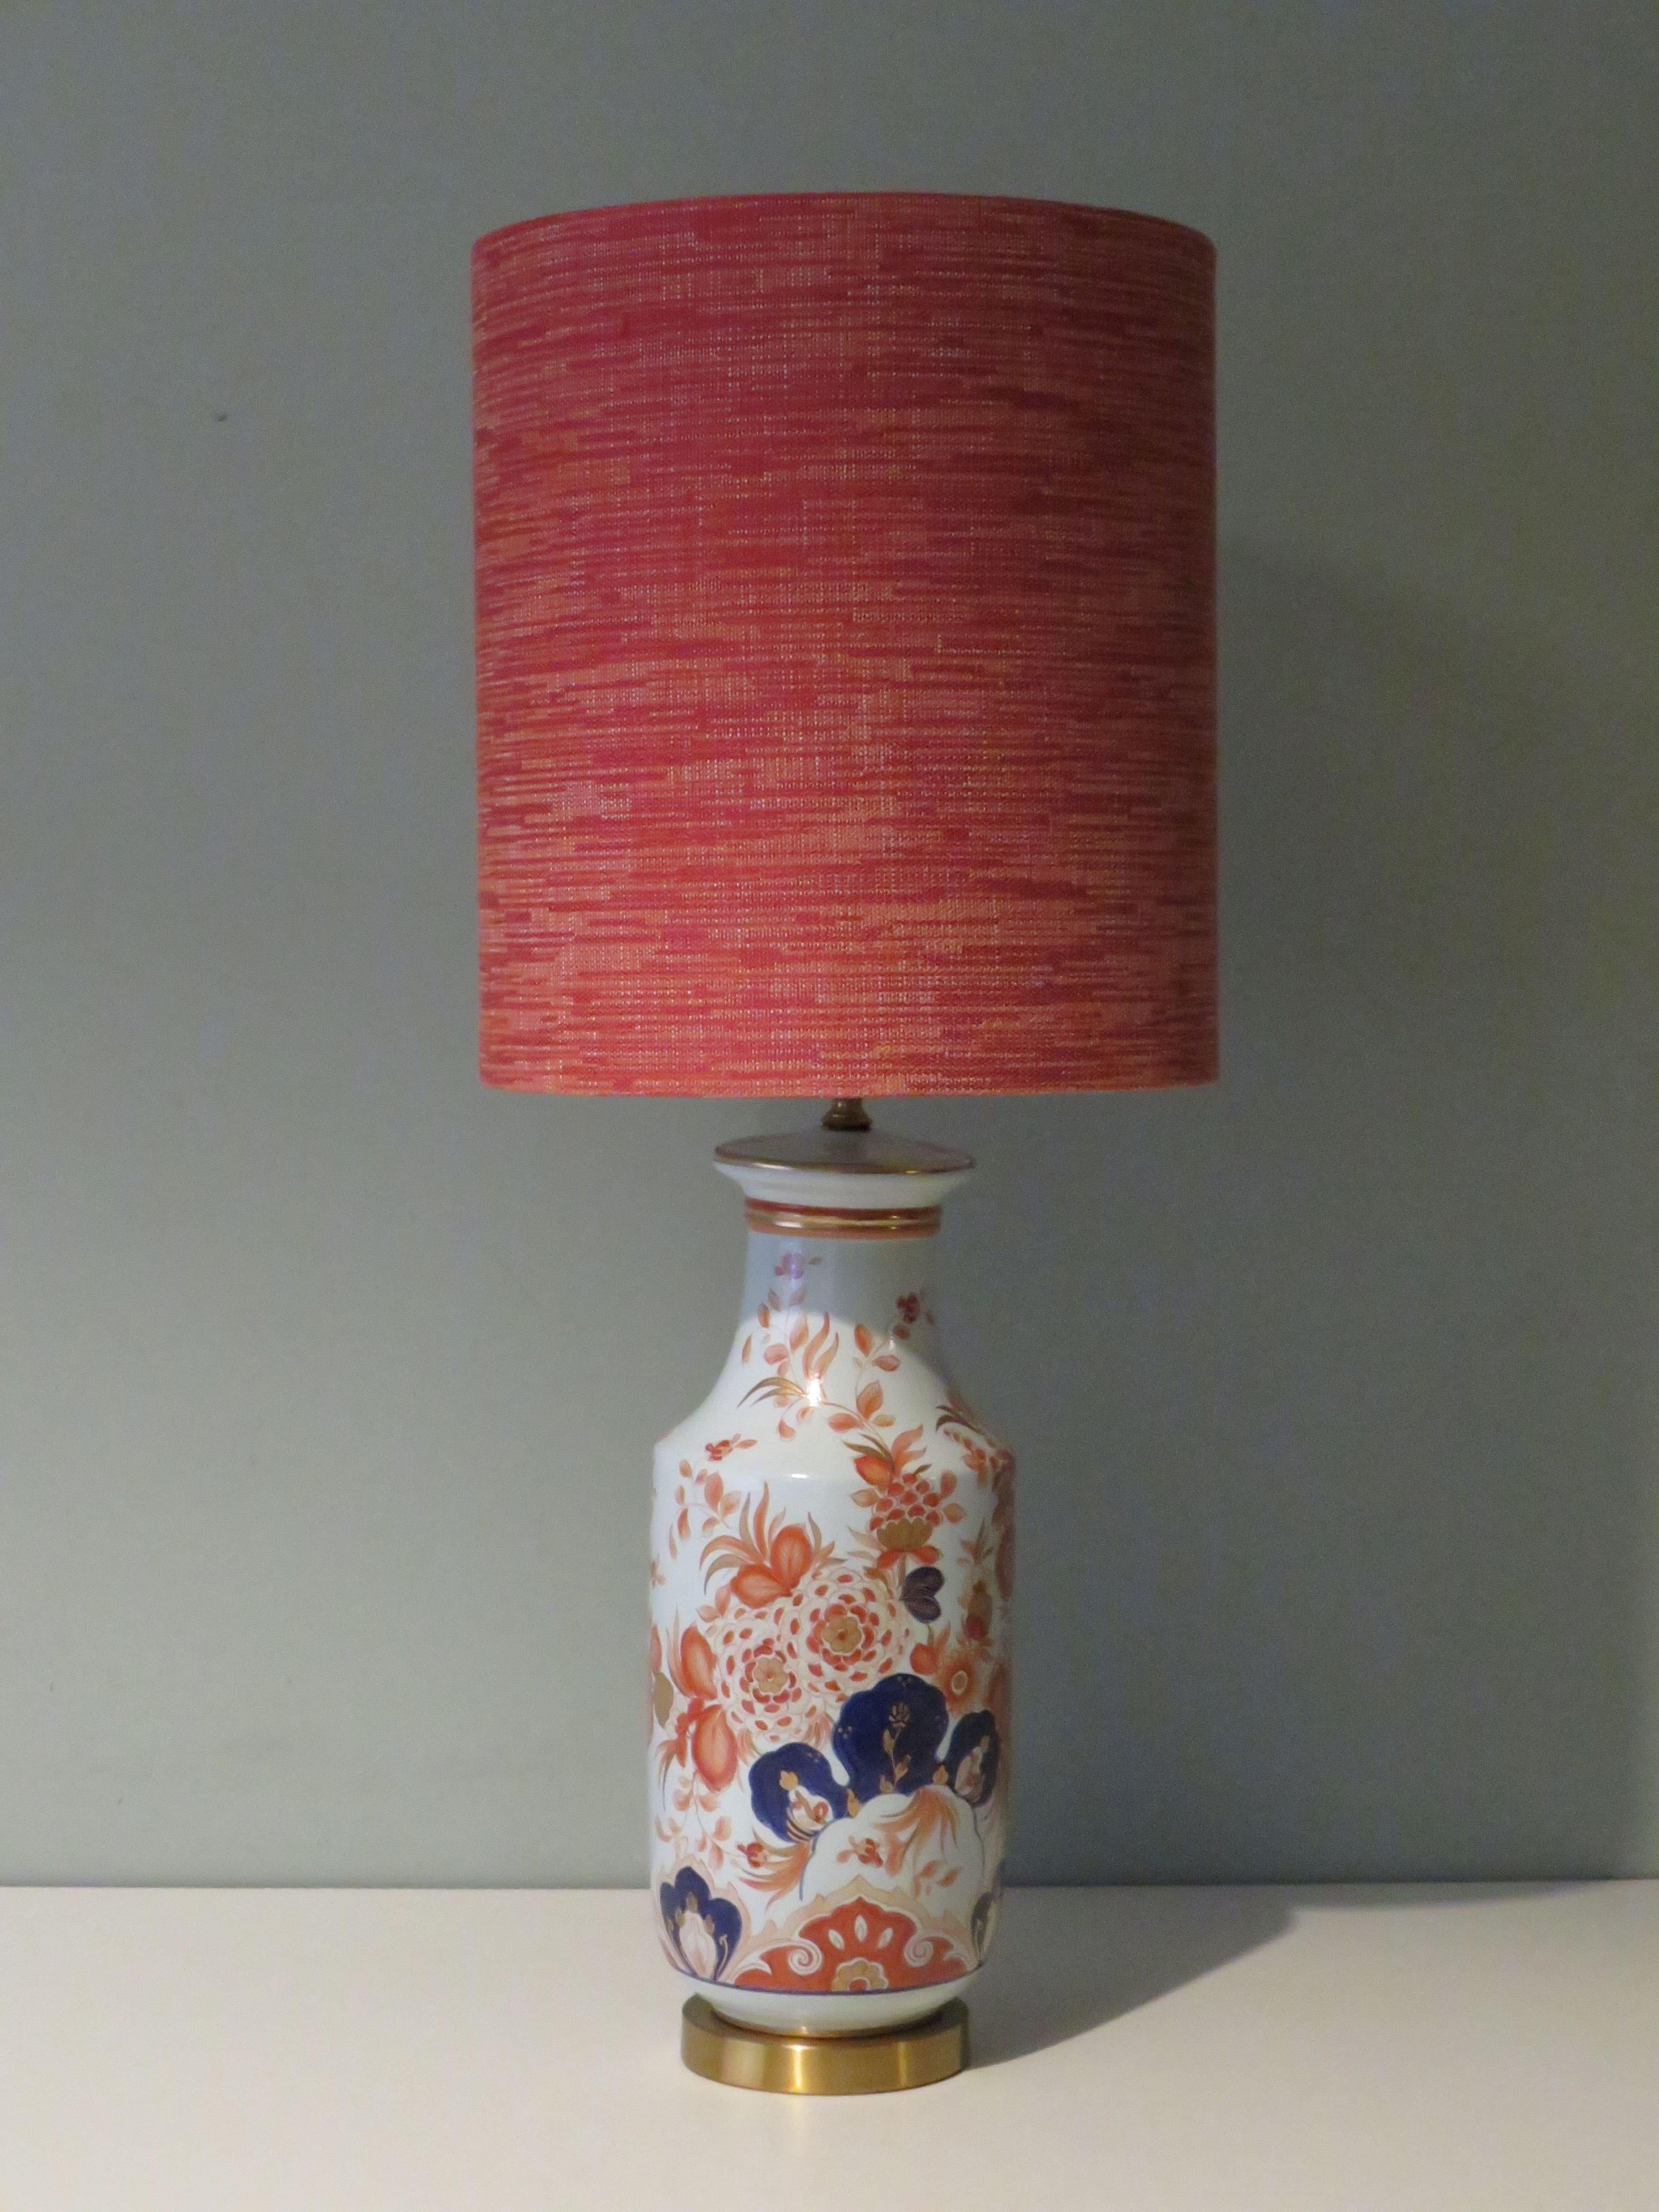 The lamp base has an attractive Imari-inspired floral pattern and is mounted on a brass base.
The table lamp has a professionally handmade custom lampshade made of coarsely woven velvety fabric in orange, red and white tones.
The table lamp has a